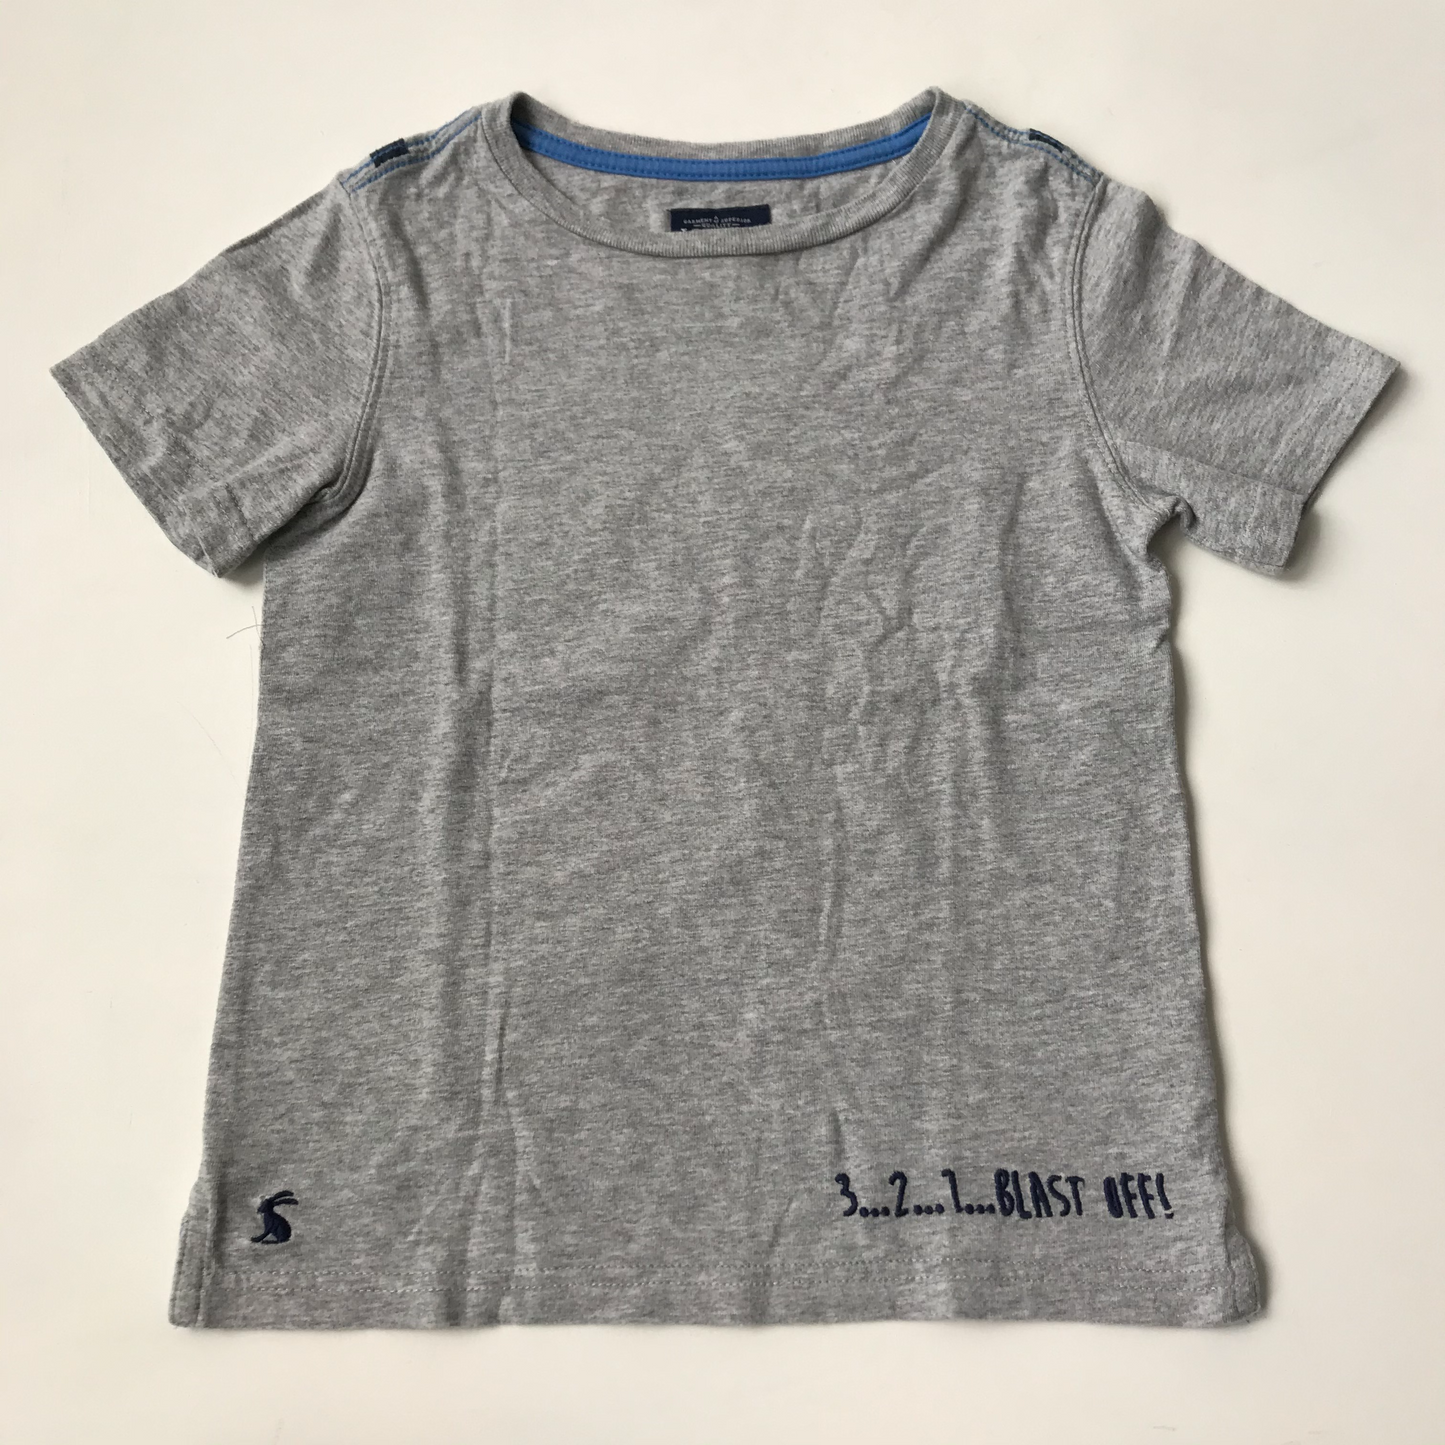 T-shirt - Joules - Age 6